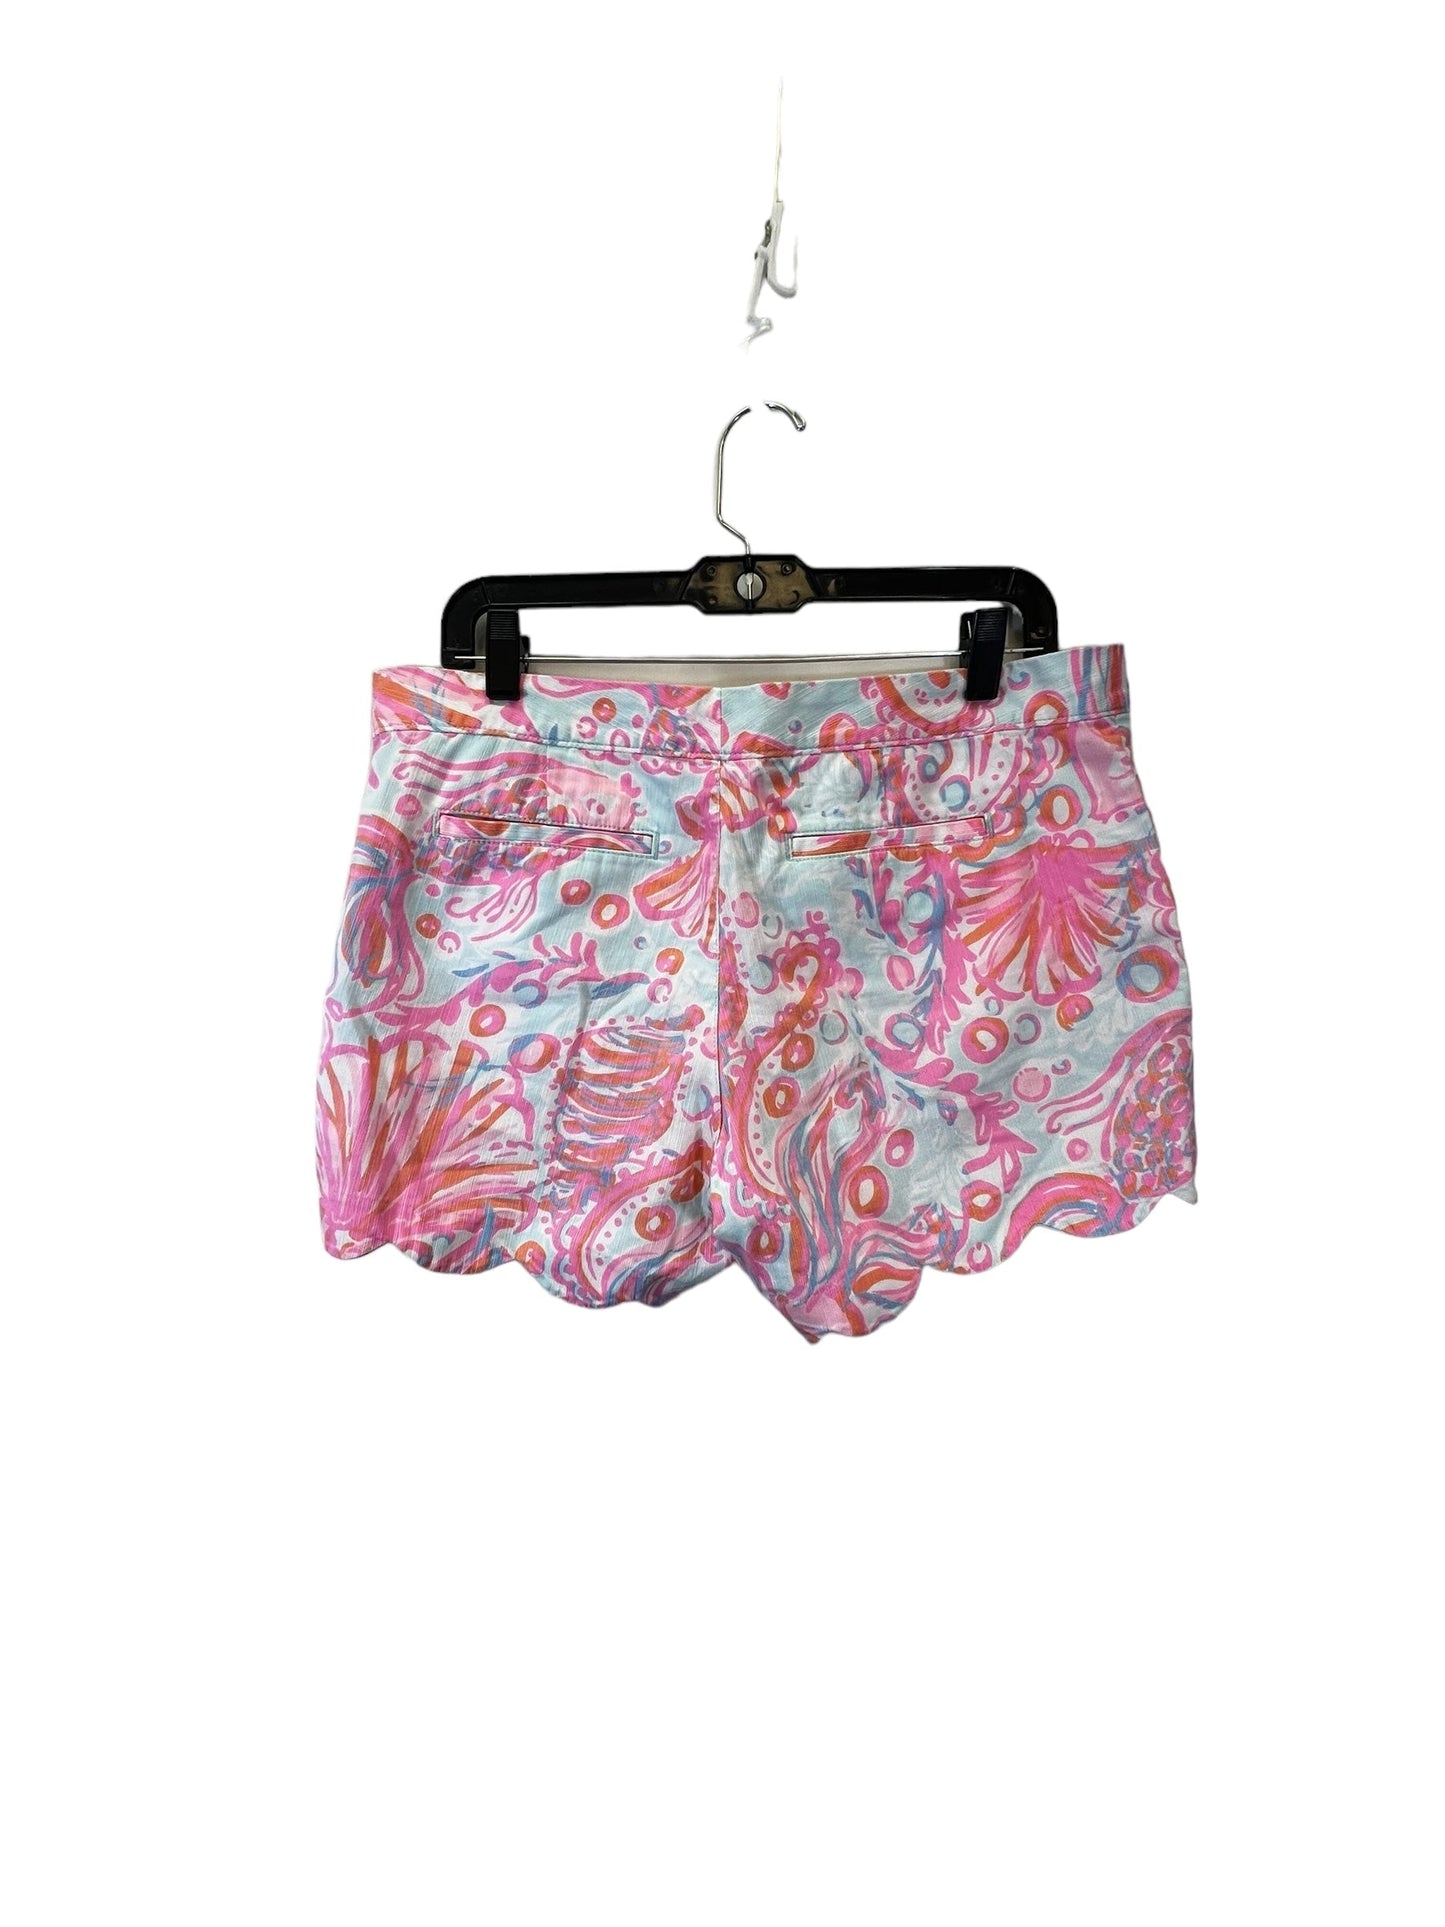 Pink & White Shorts Lilly Pulitzer, Size 10